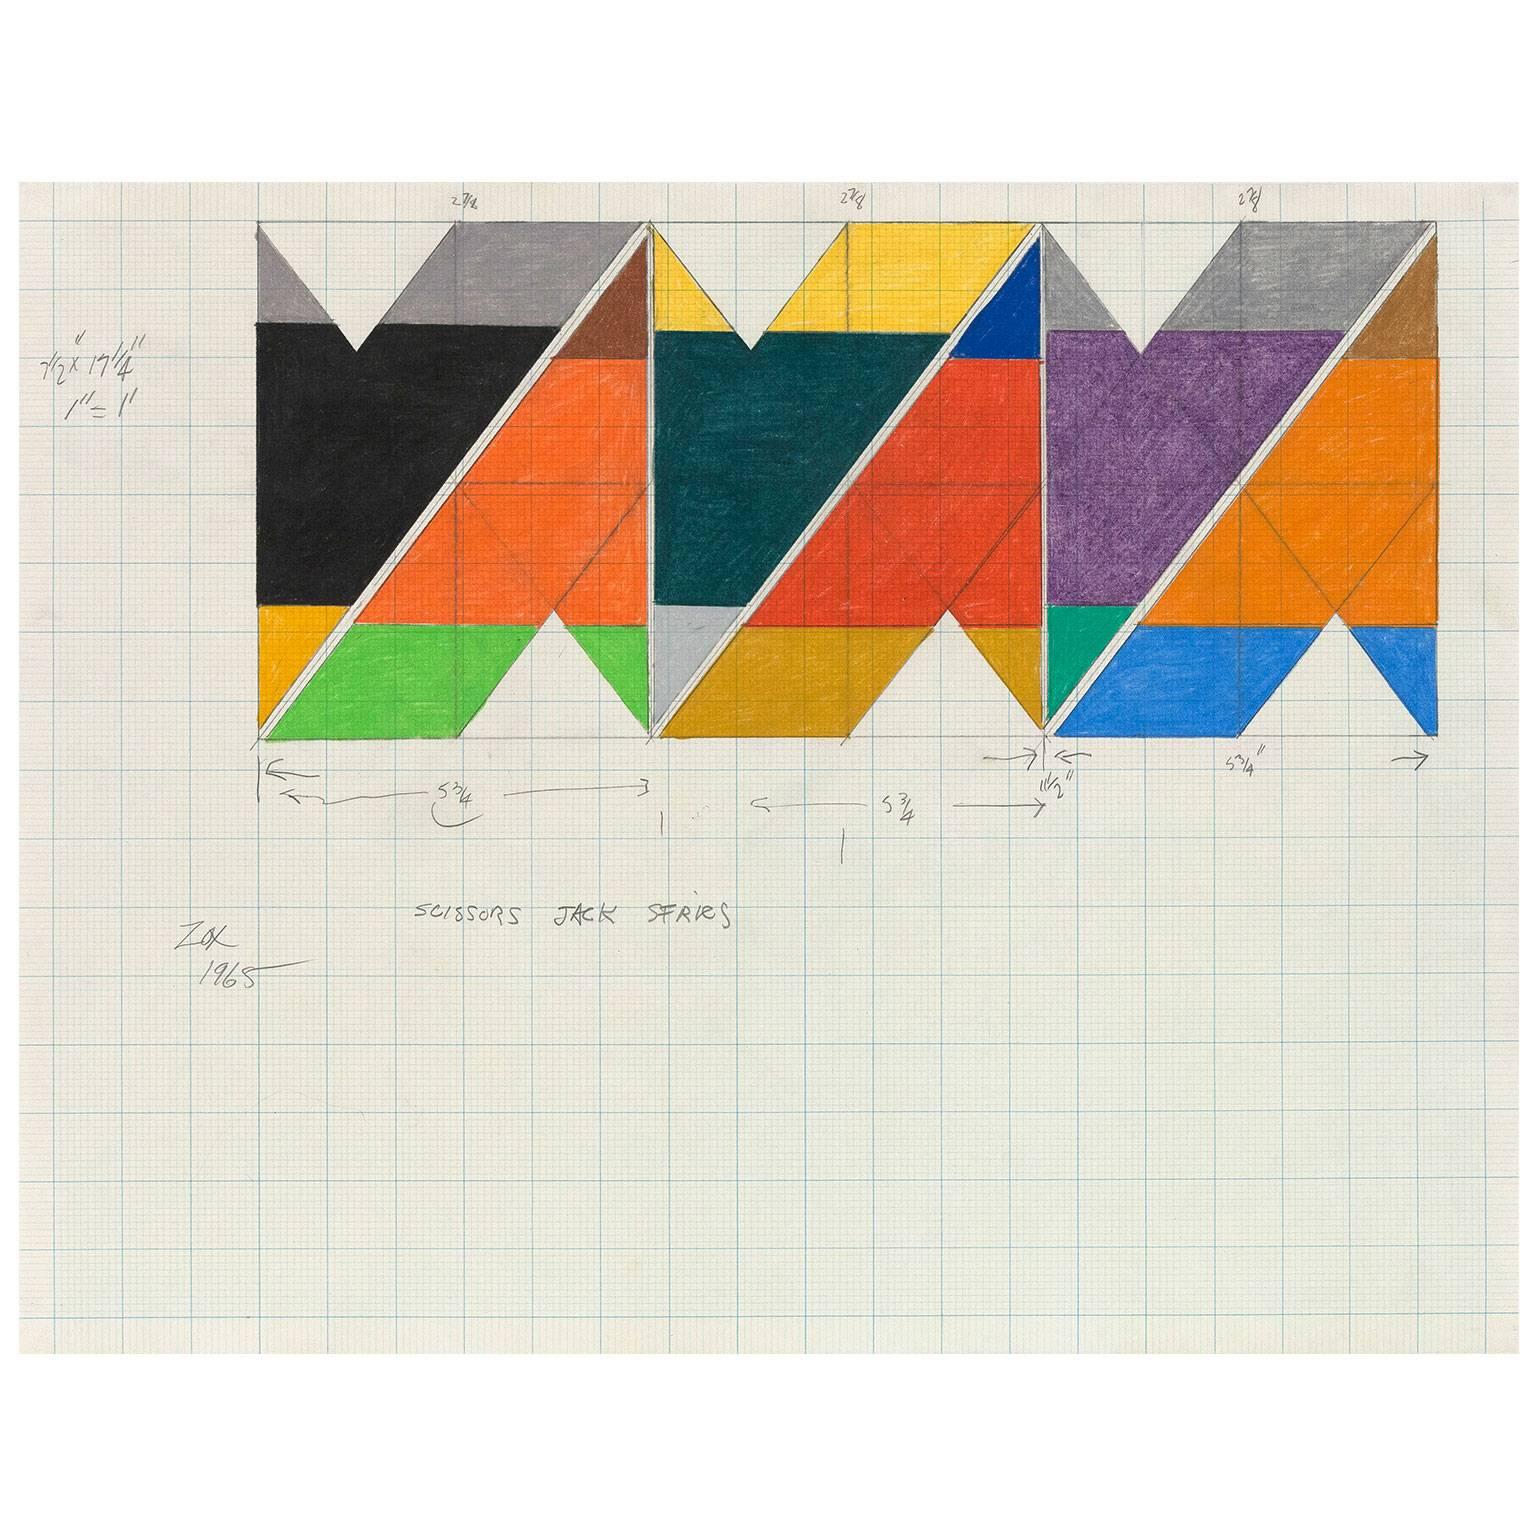 Larry Zox (b. 1931) was a central figure in both the 1960s American Lyrical Abstraction movement and followed by hard-edged abstraction. Zoe's work was inspired by leading color field painters such Kenneth Noland and Morris Louis.

Raised in Des